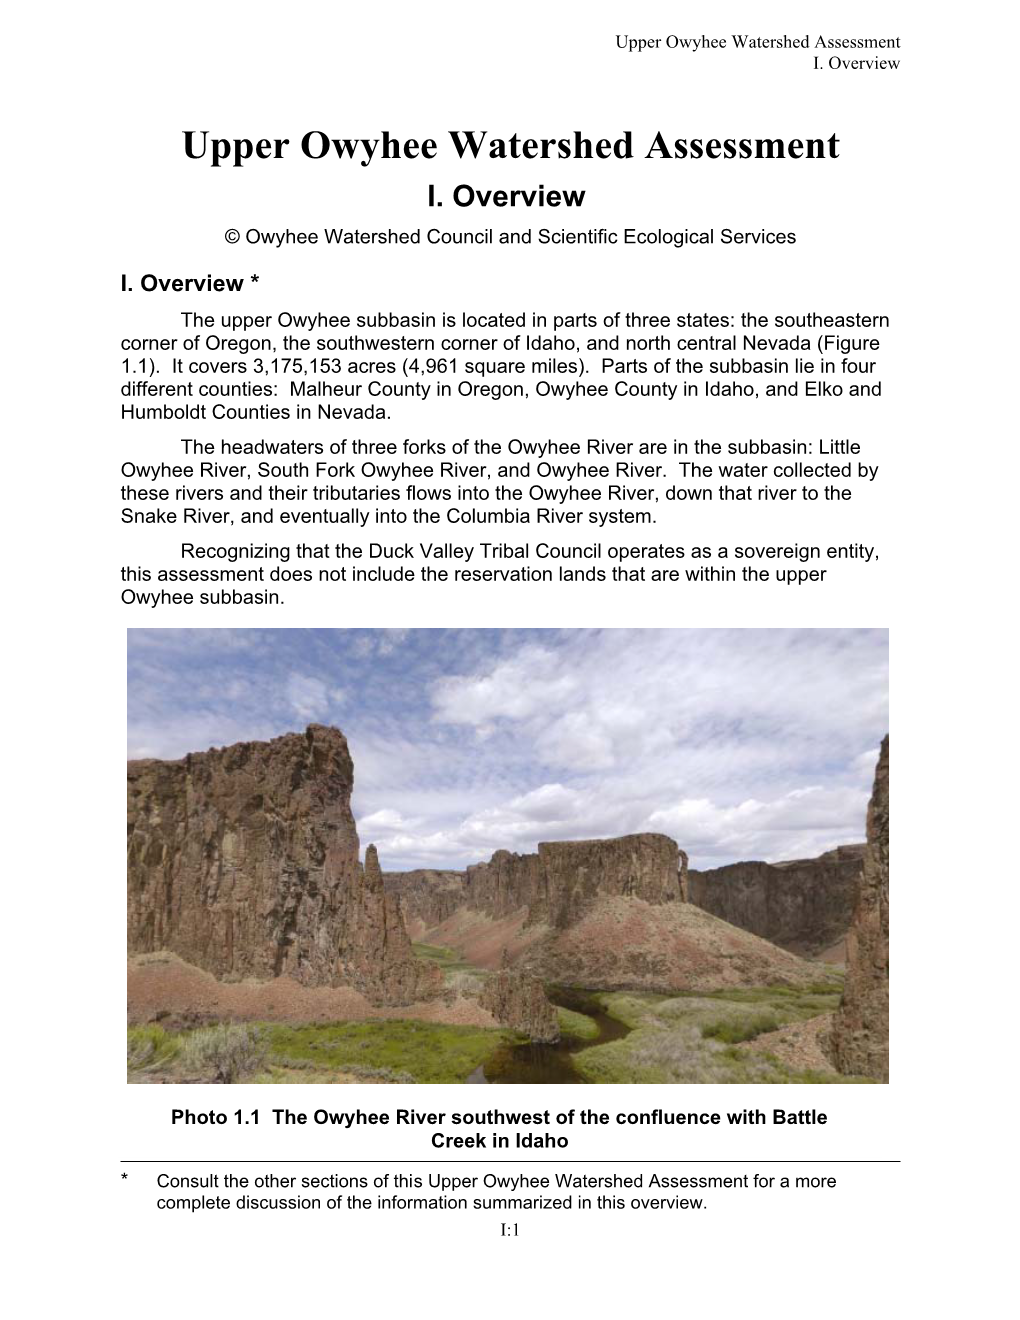 Upper Owyhee Watershed Assessment I